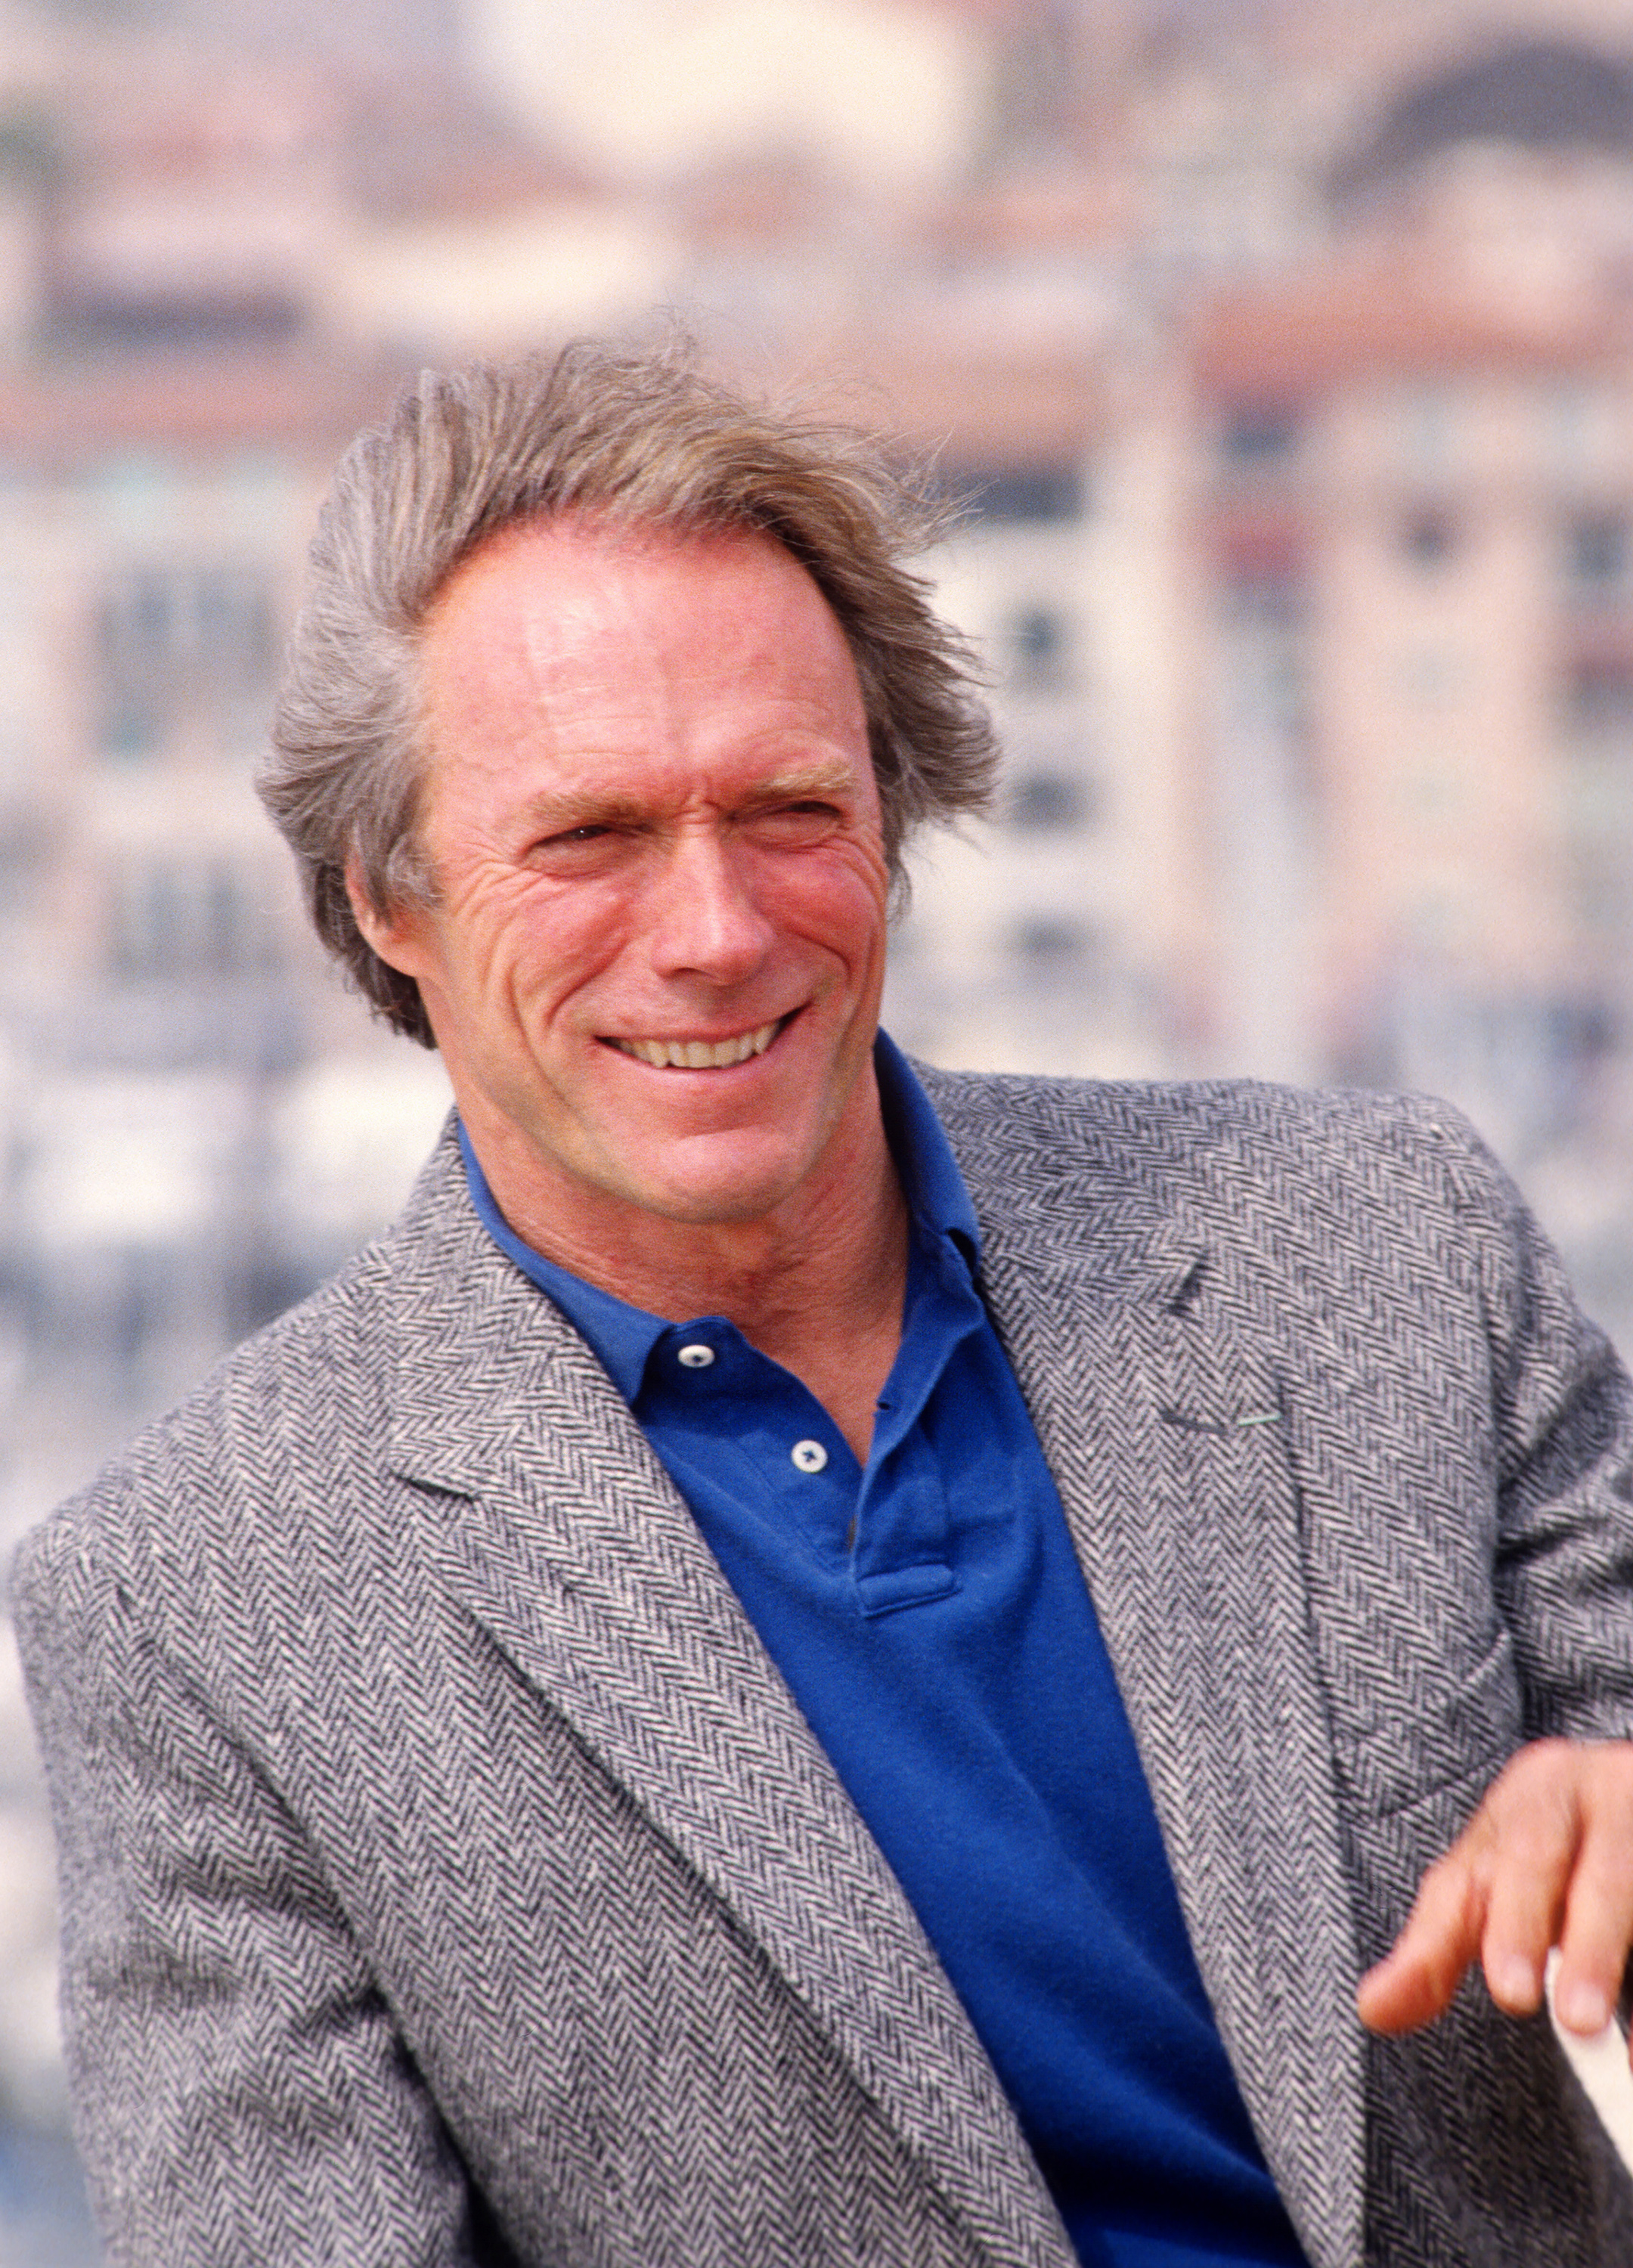 Close-up of Clint smiling in a jacket and shirt